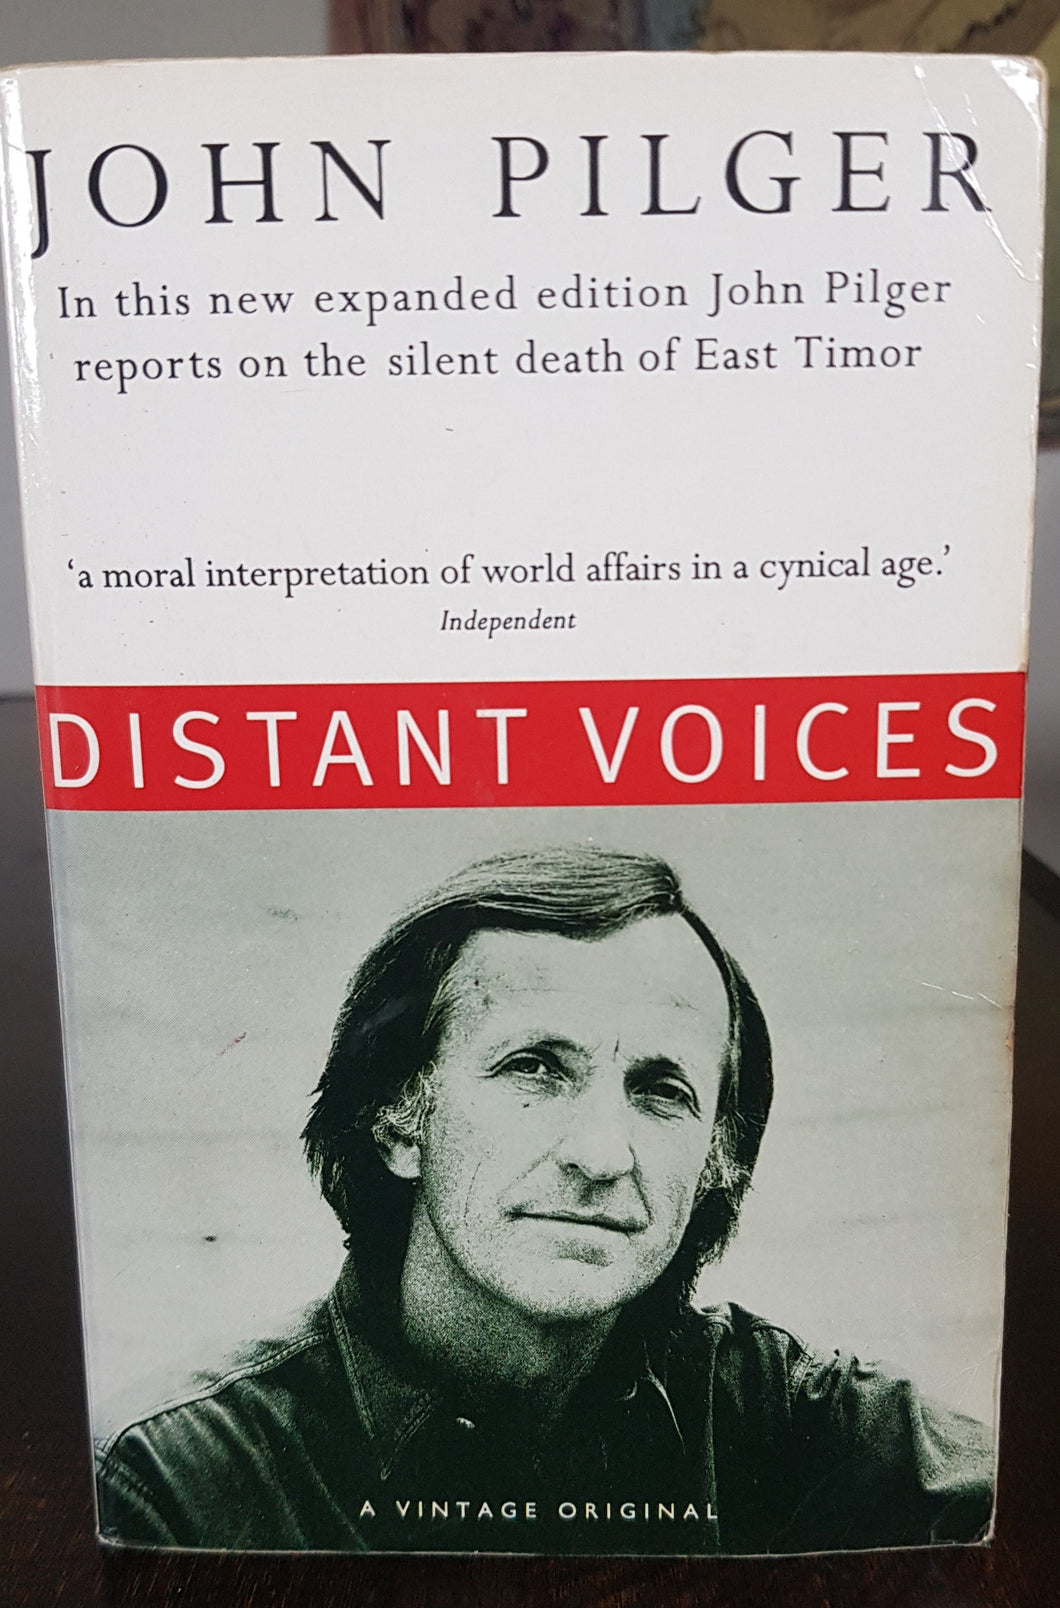 Distant Voices by John Pilger